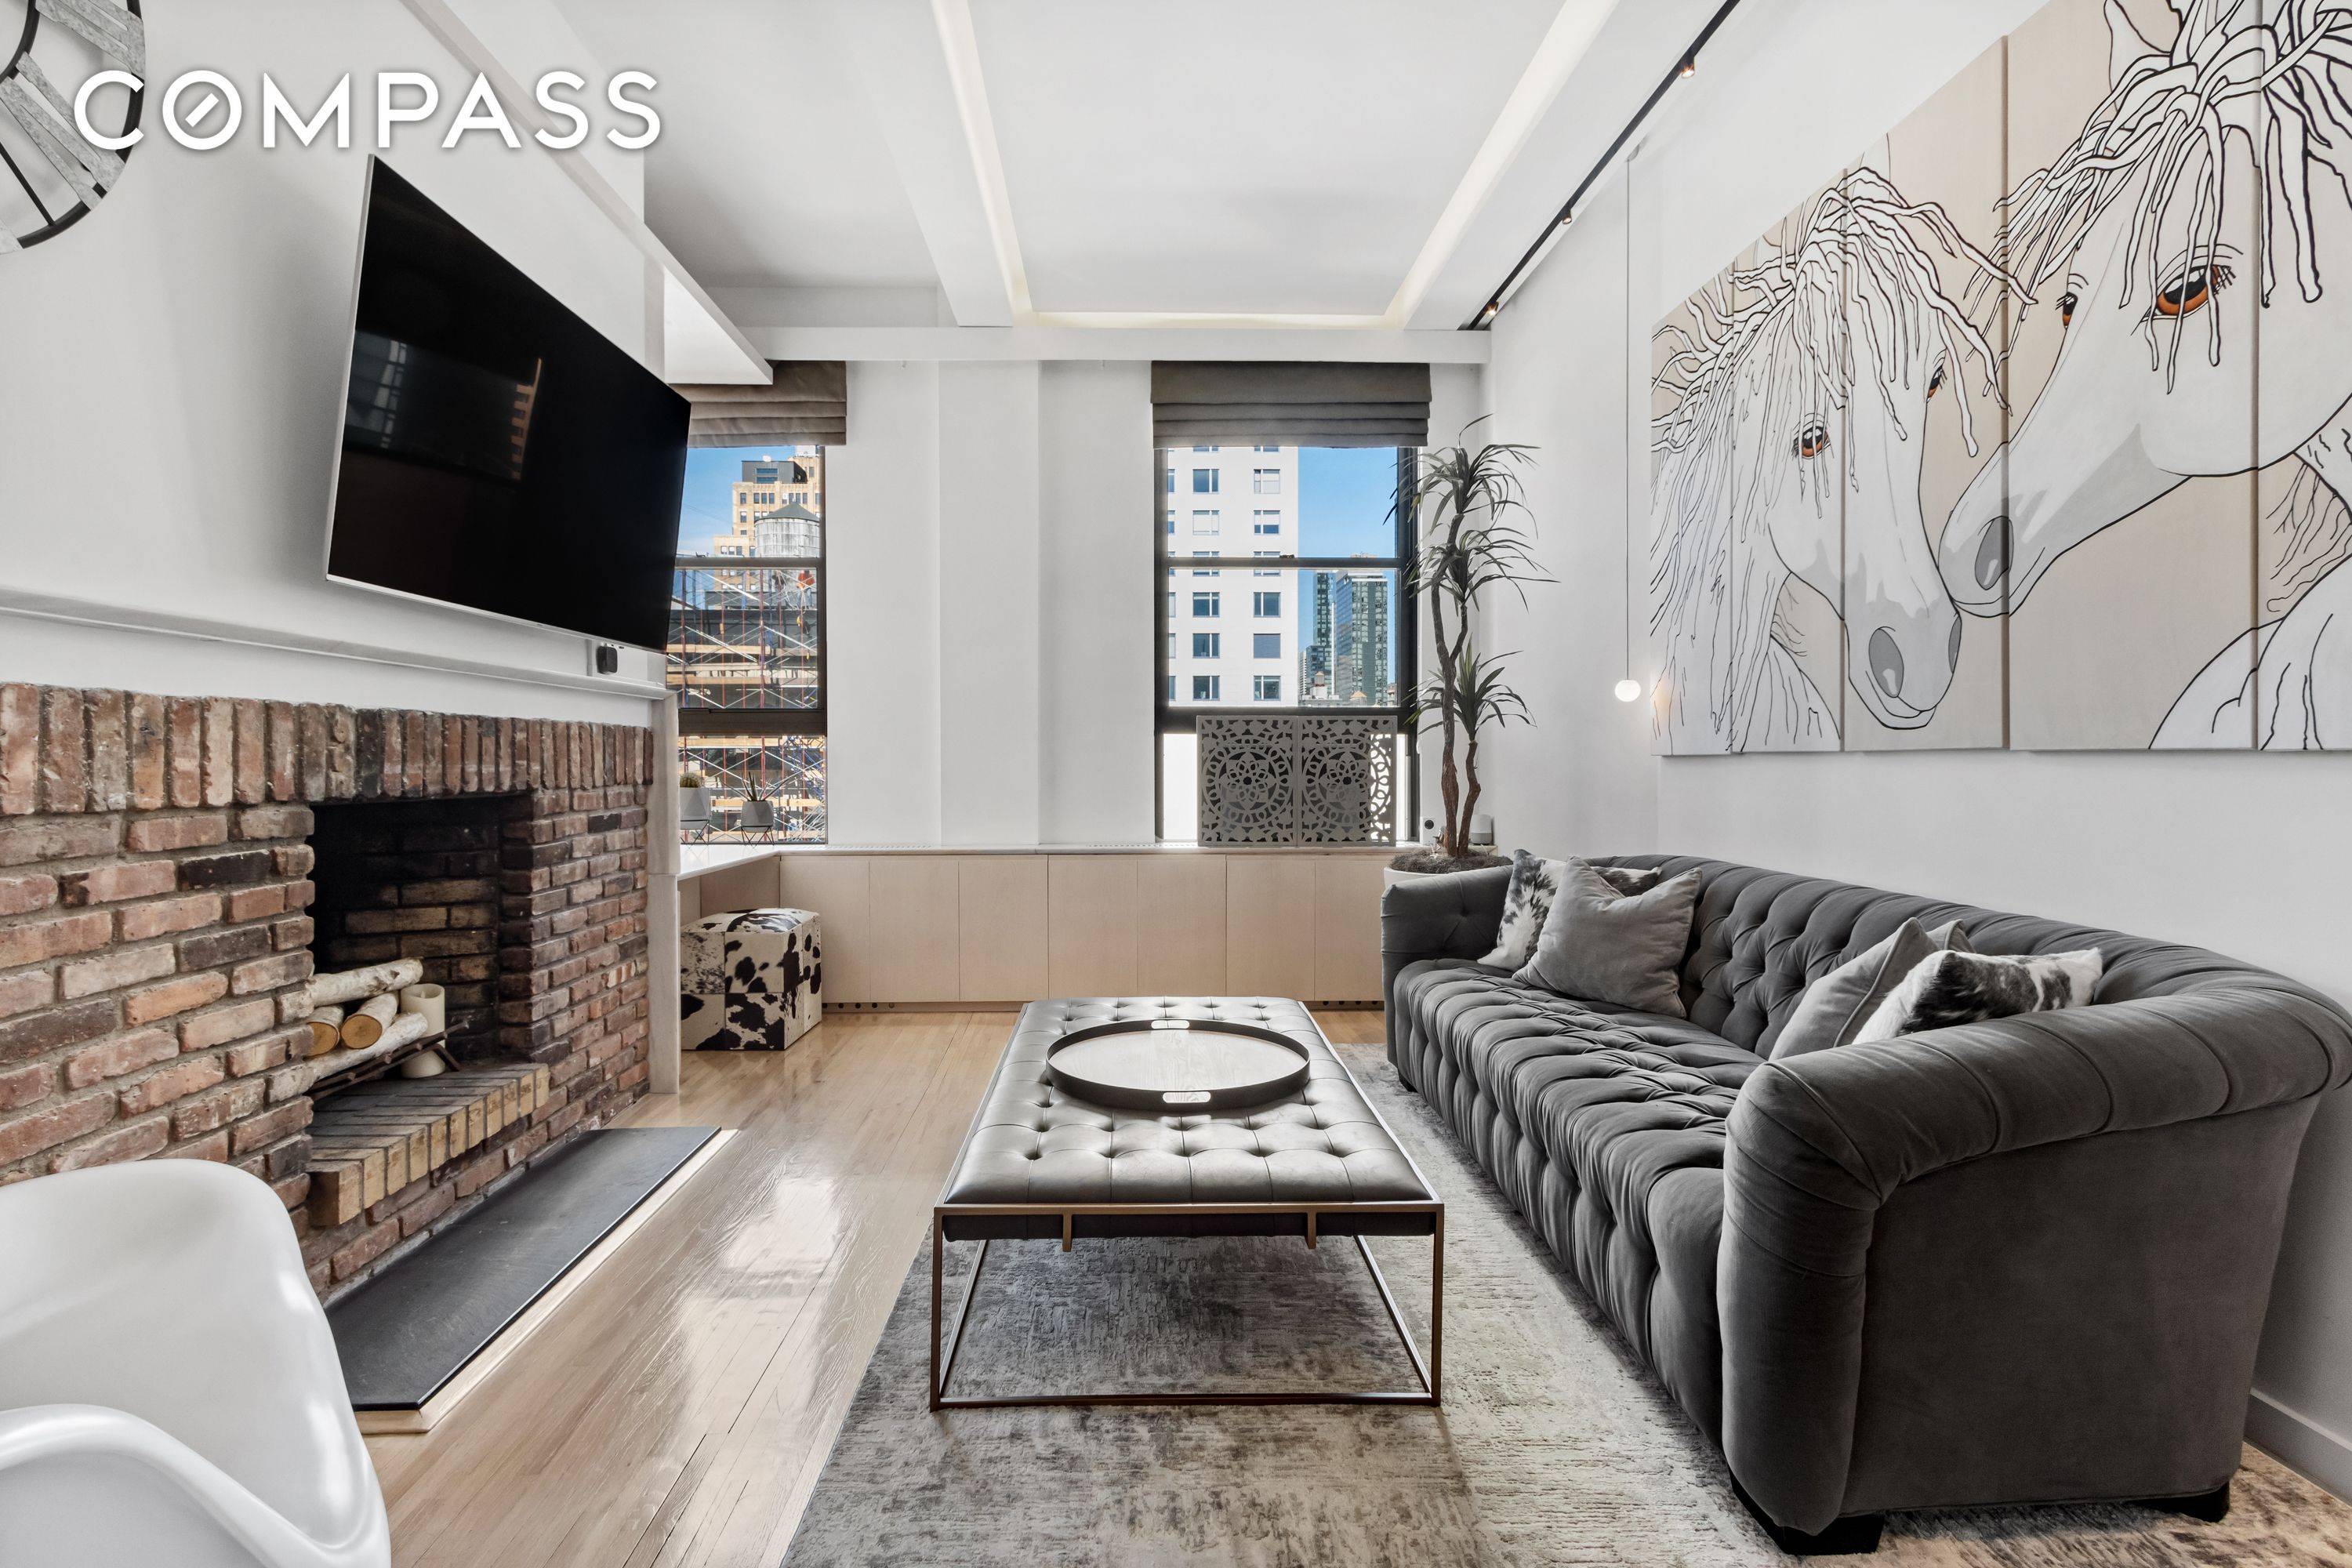 Penthouse one bedroom loft with oversized windows and soaring 11 high ceilings.